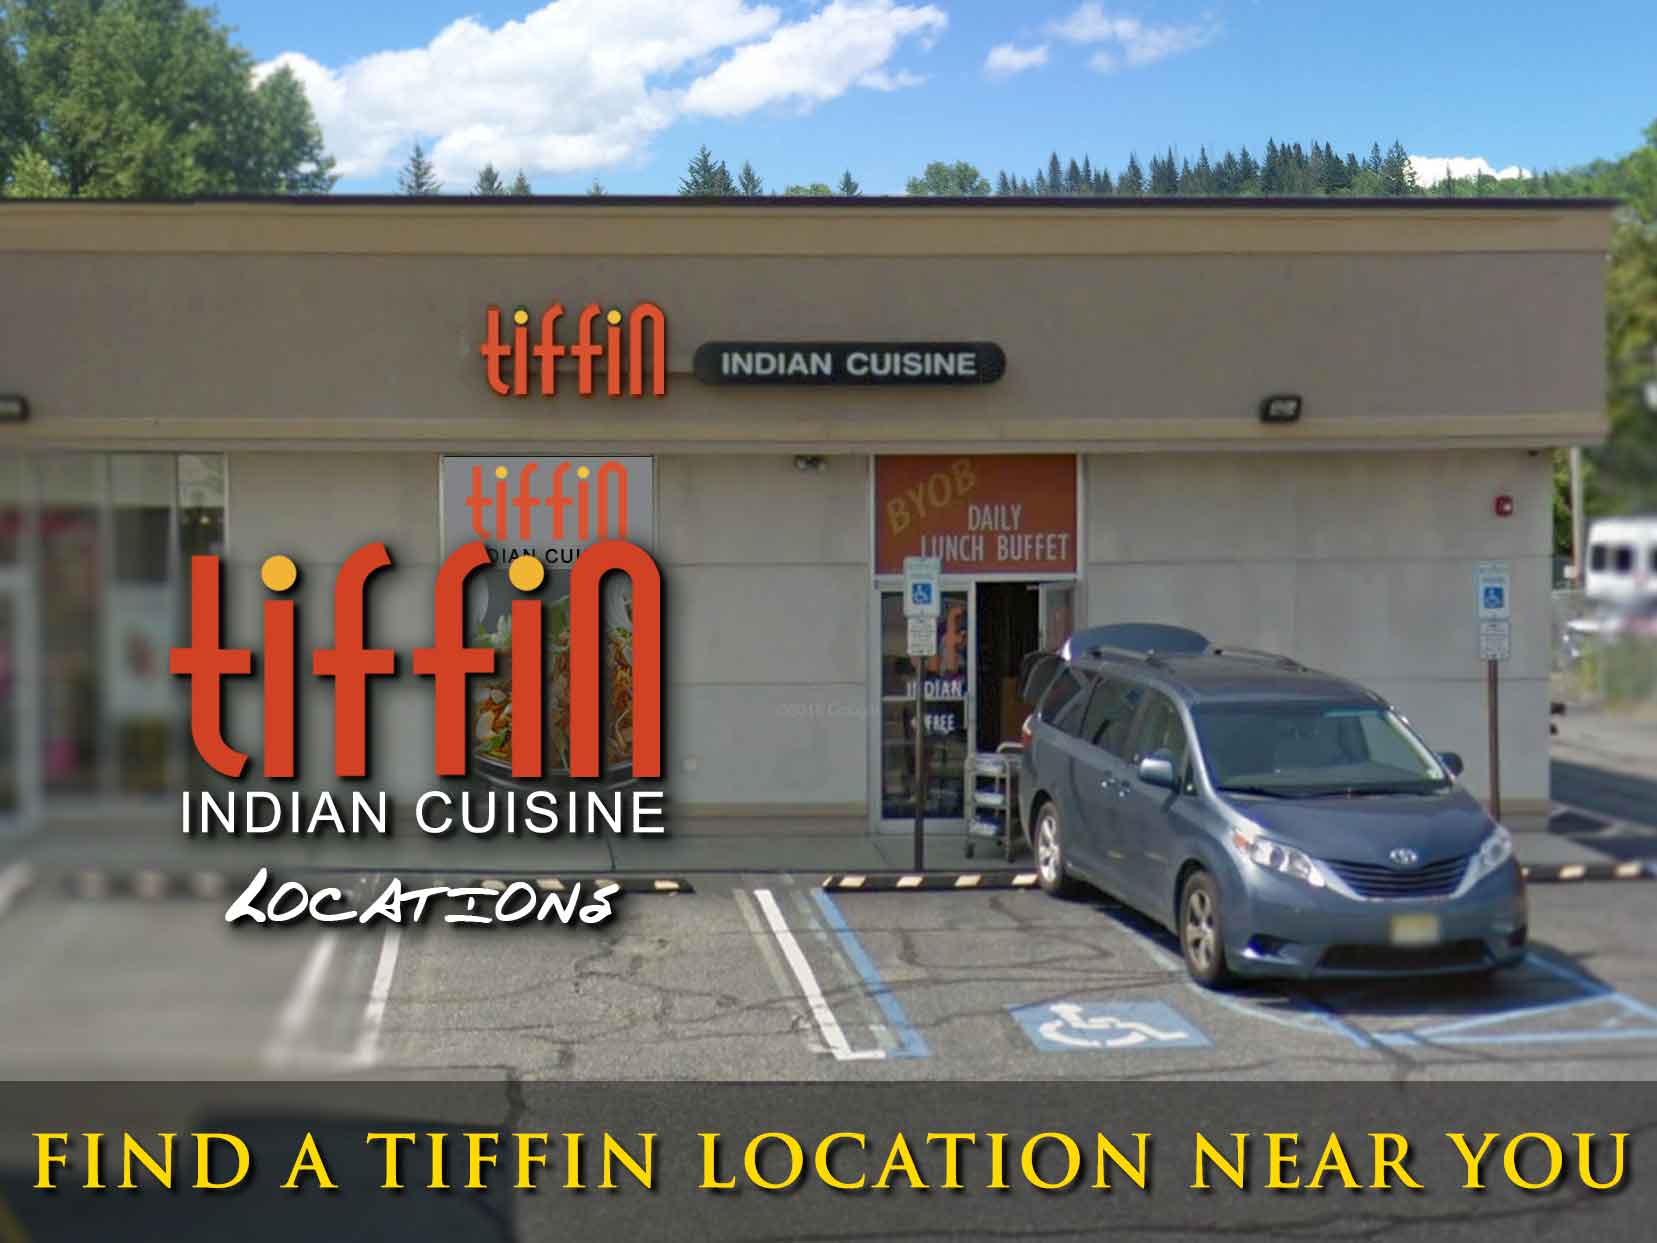 Tiffin Indian Cuisine Menu Cherry Hill Township of Cherry Hill Camden County 08003 delivery to Voorhees Haddonfield Maple Shade Springdale Woodcrest Greentree Willowdale Summerdale Laurel Springs Lindenwold